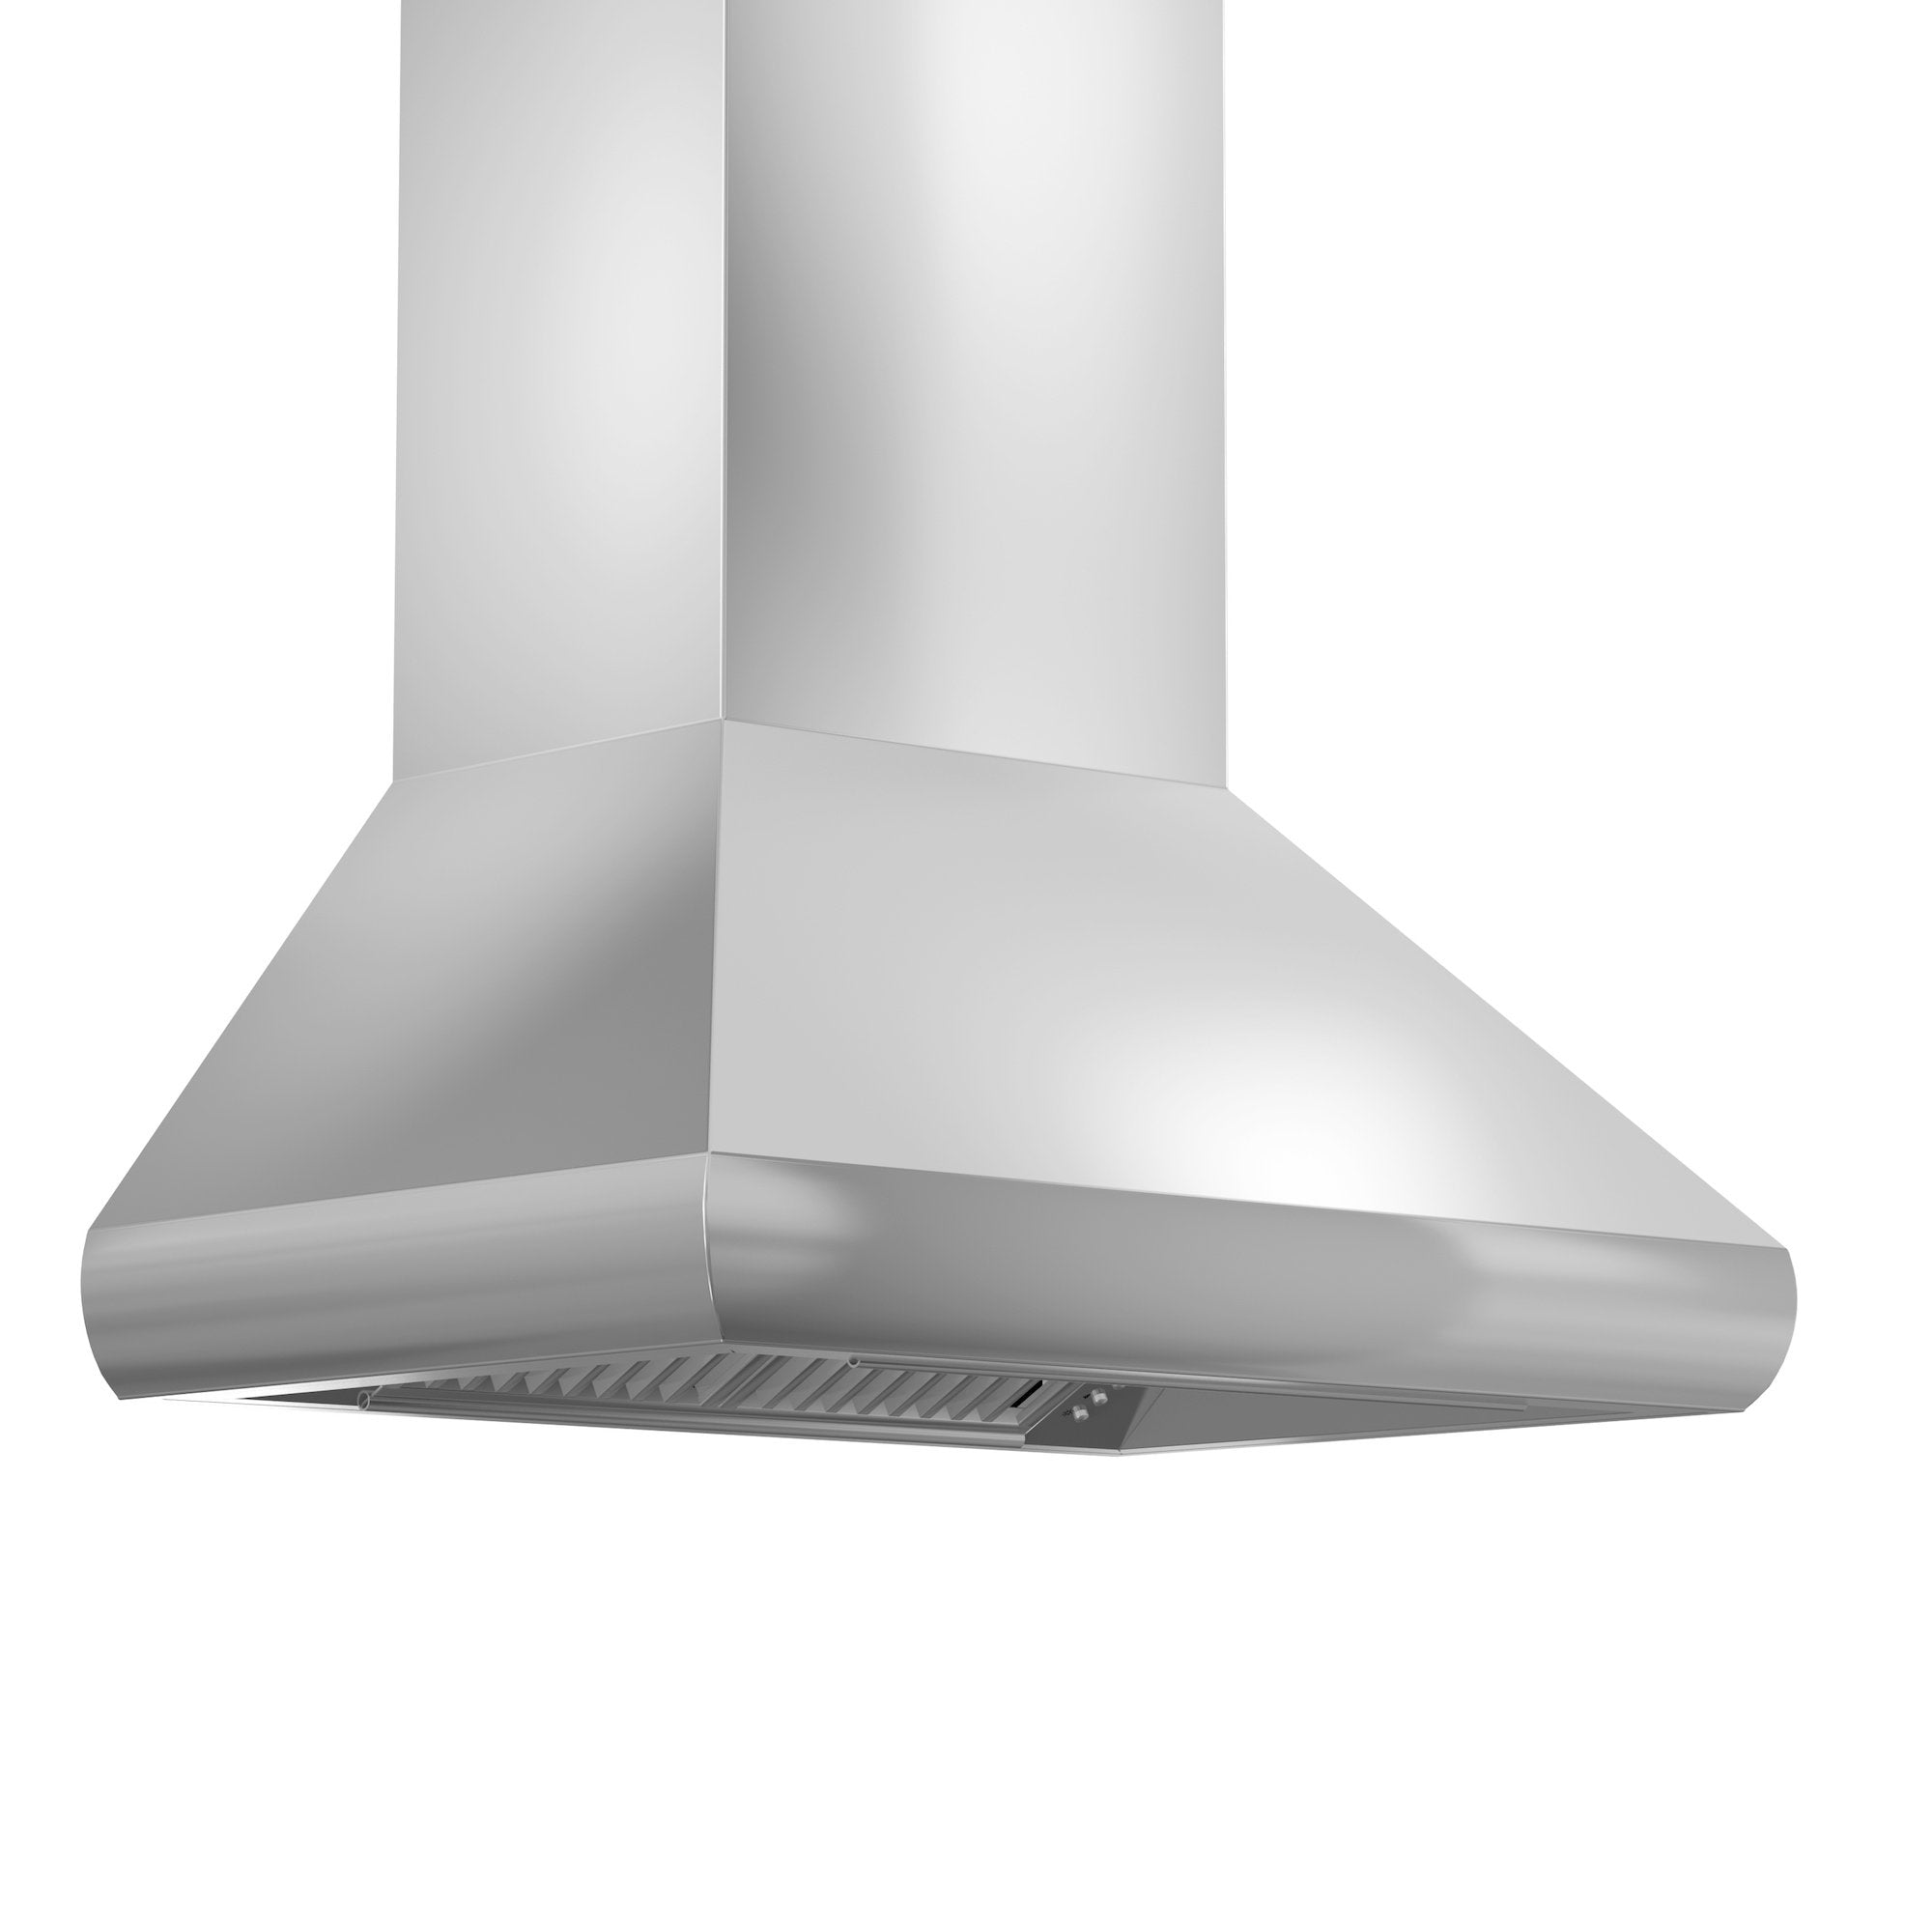 ZLINE Kitchen and Bath, ZLINE Wall Mount Range Hood In Stainless Steel - Includes Remote Blower (587), 587-RS-30-400,